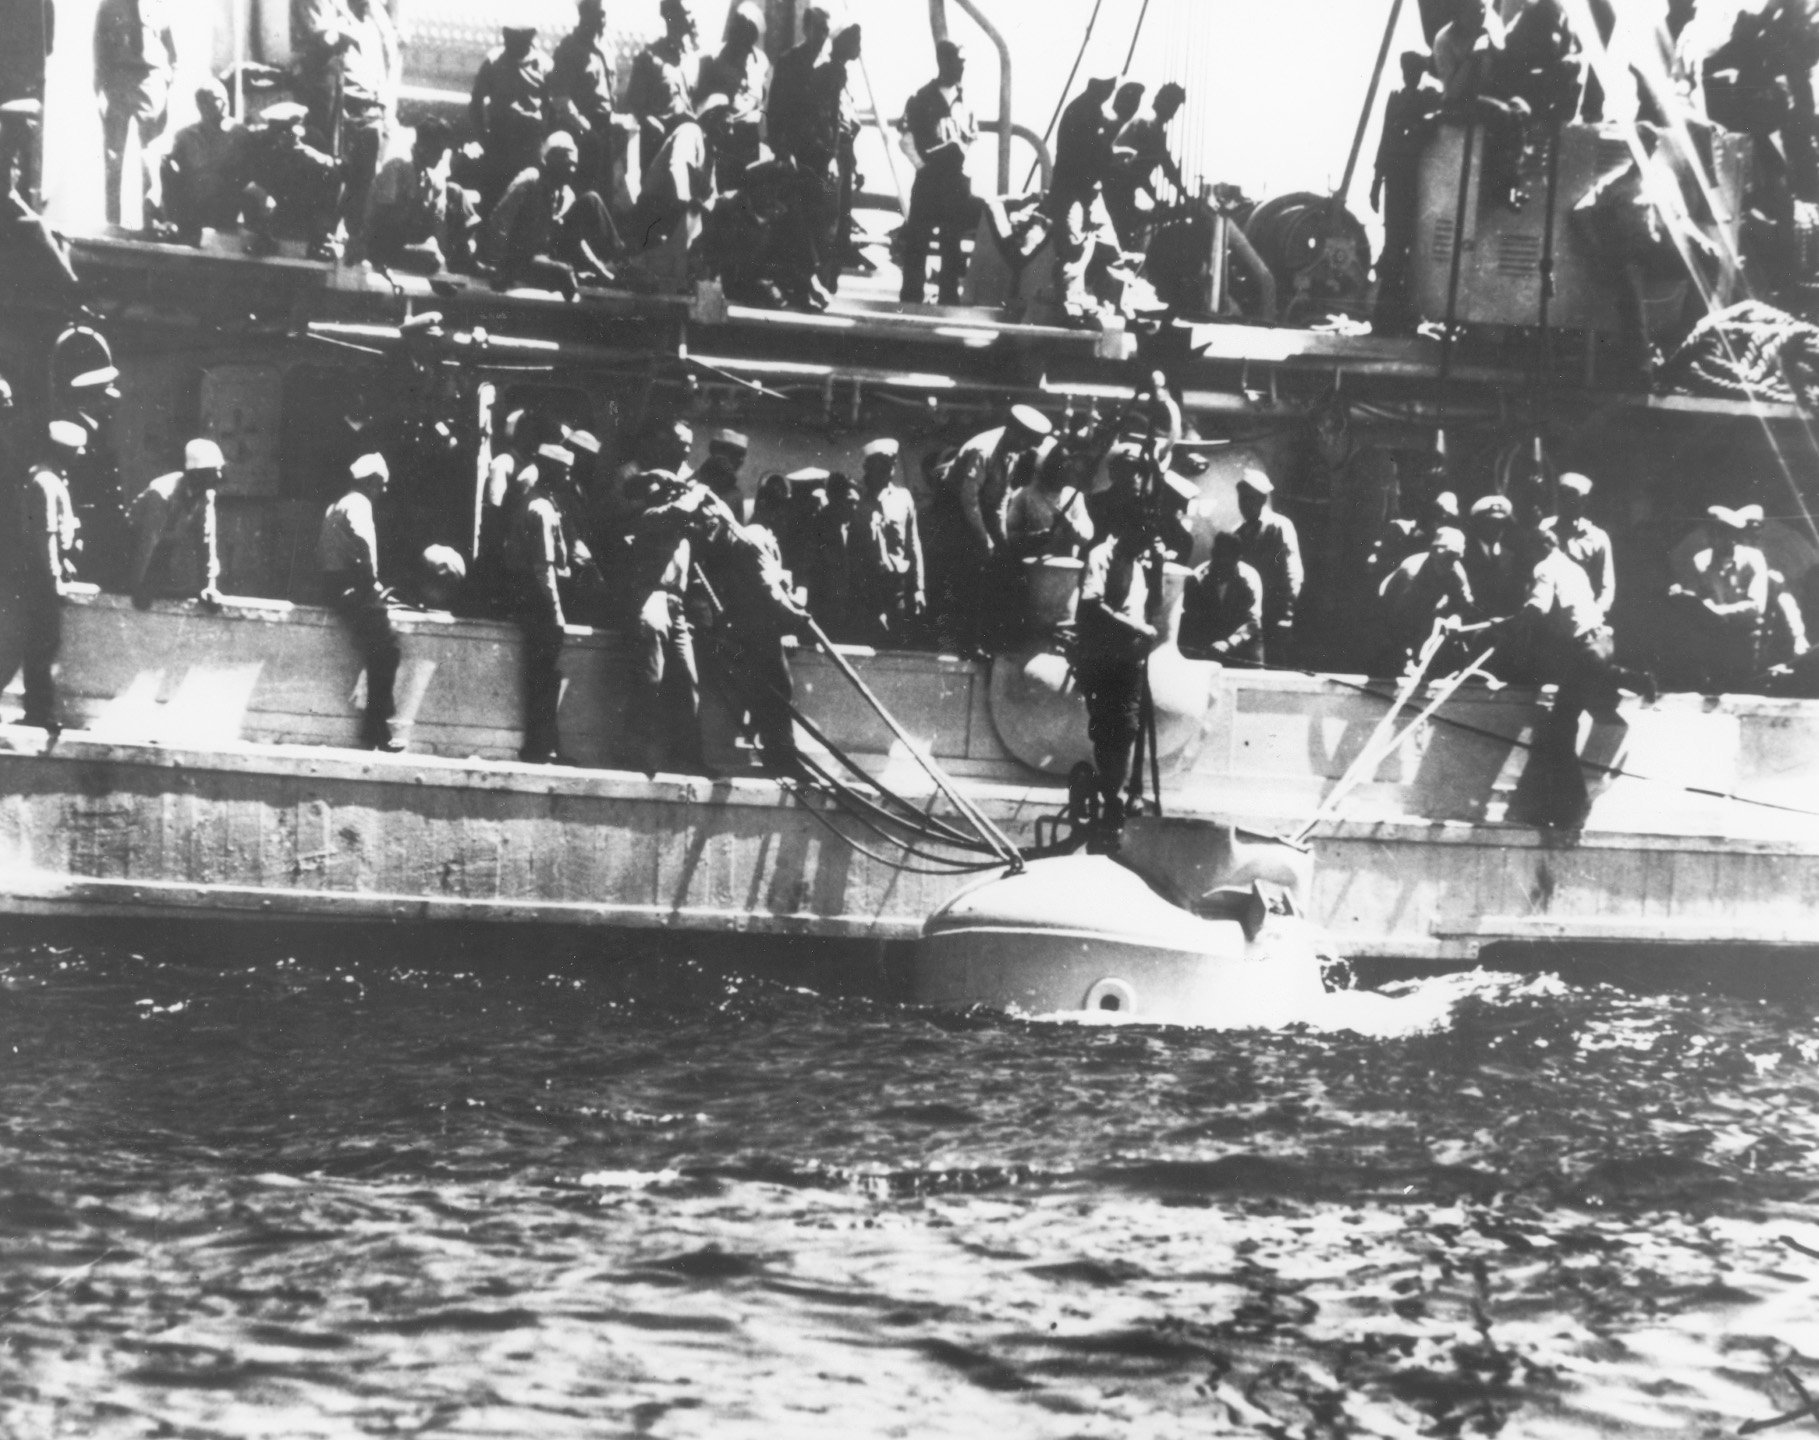 The McCann Rescue Chamber is readied aboard the USS Falcon for a rescue attempt off the coast of New England. The submarine Squalus had gone down in the Atlantic, trapping 33 sailors.